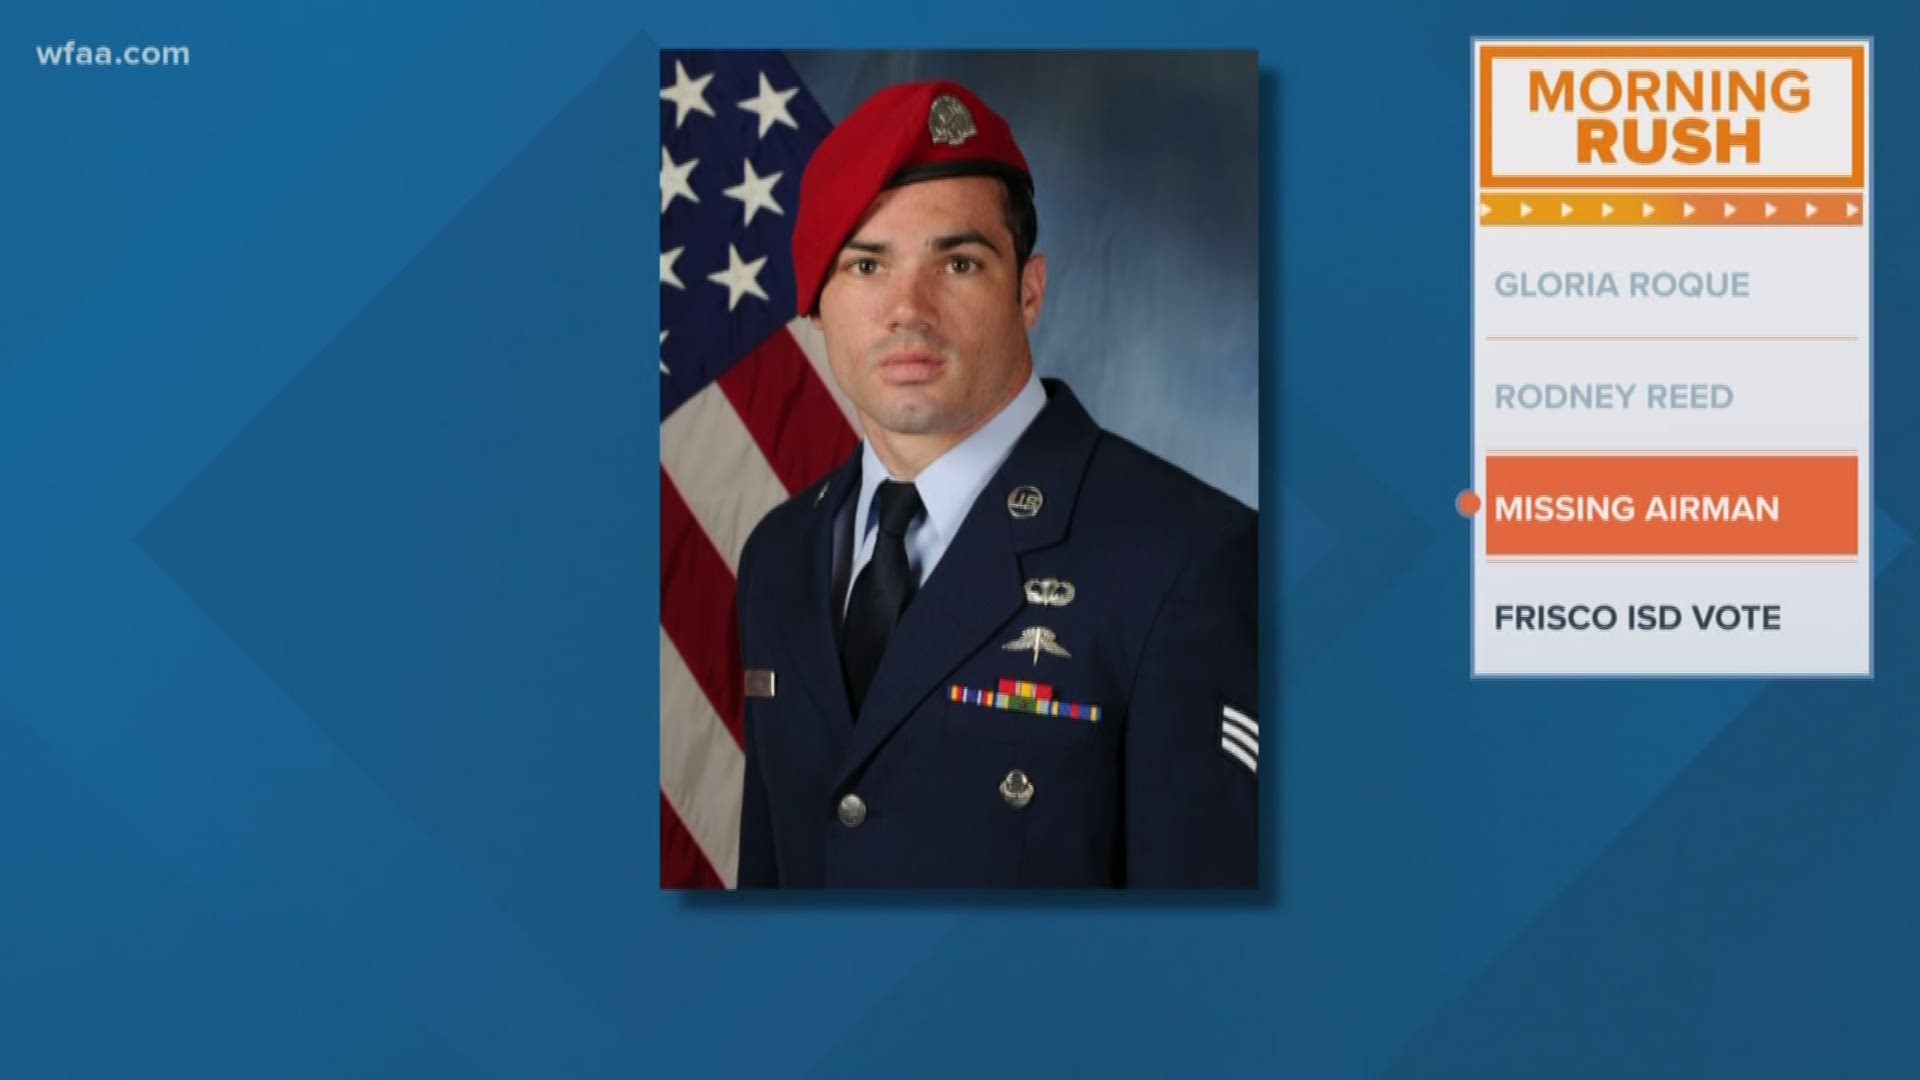 The U.S. Air Force has identified the airman who went missing over the Gulf of Mexico, and he is a Dallas native.